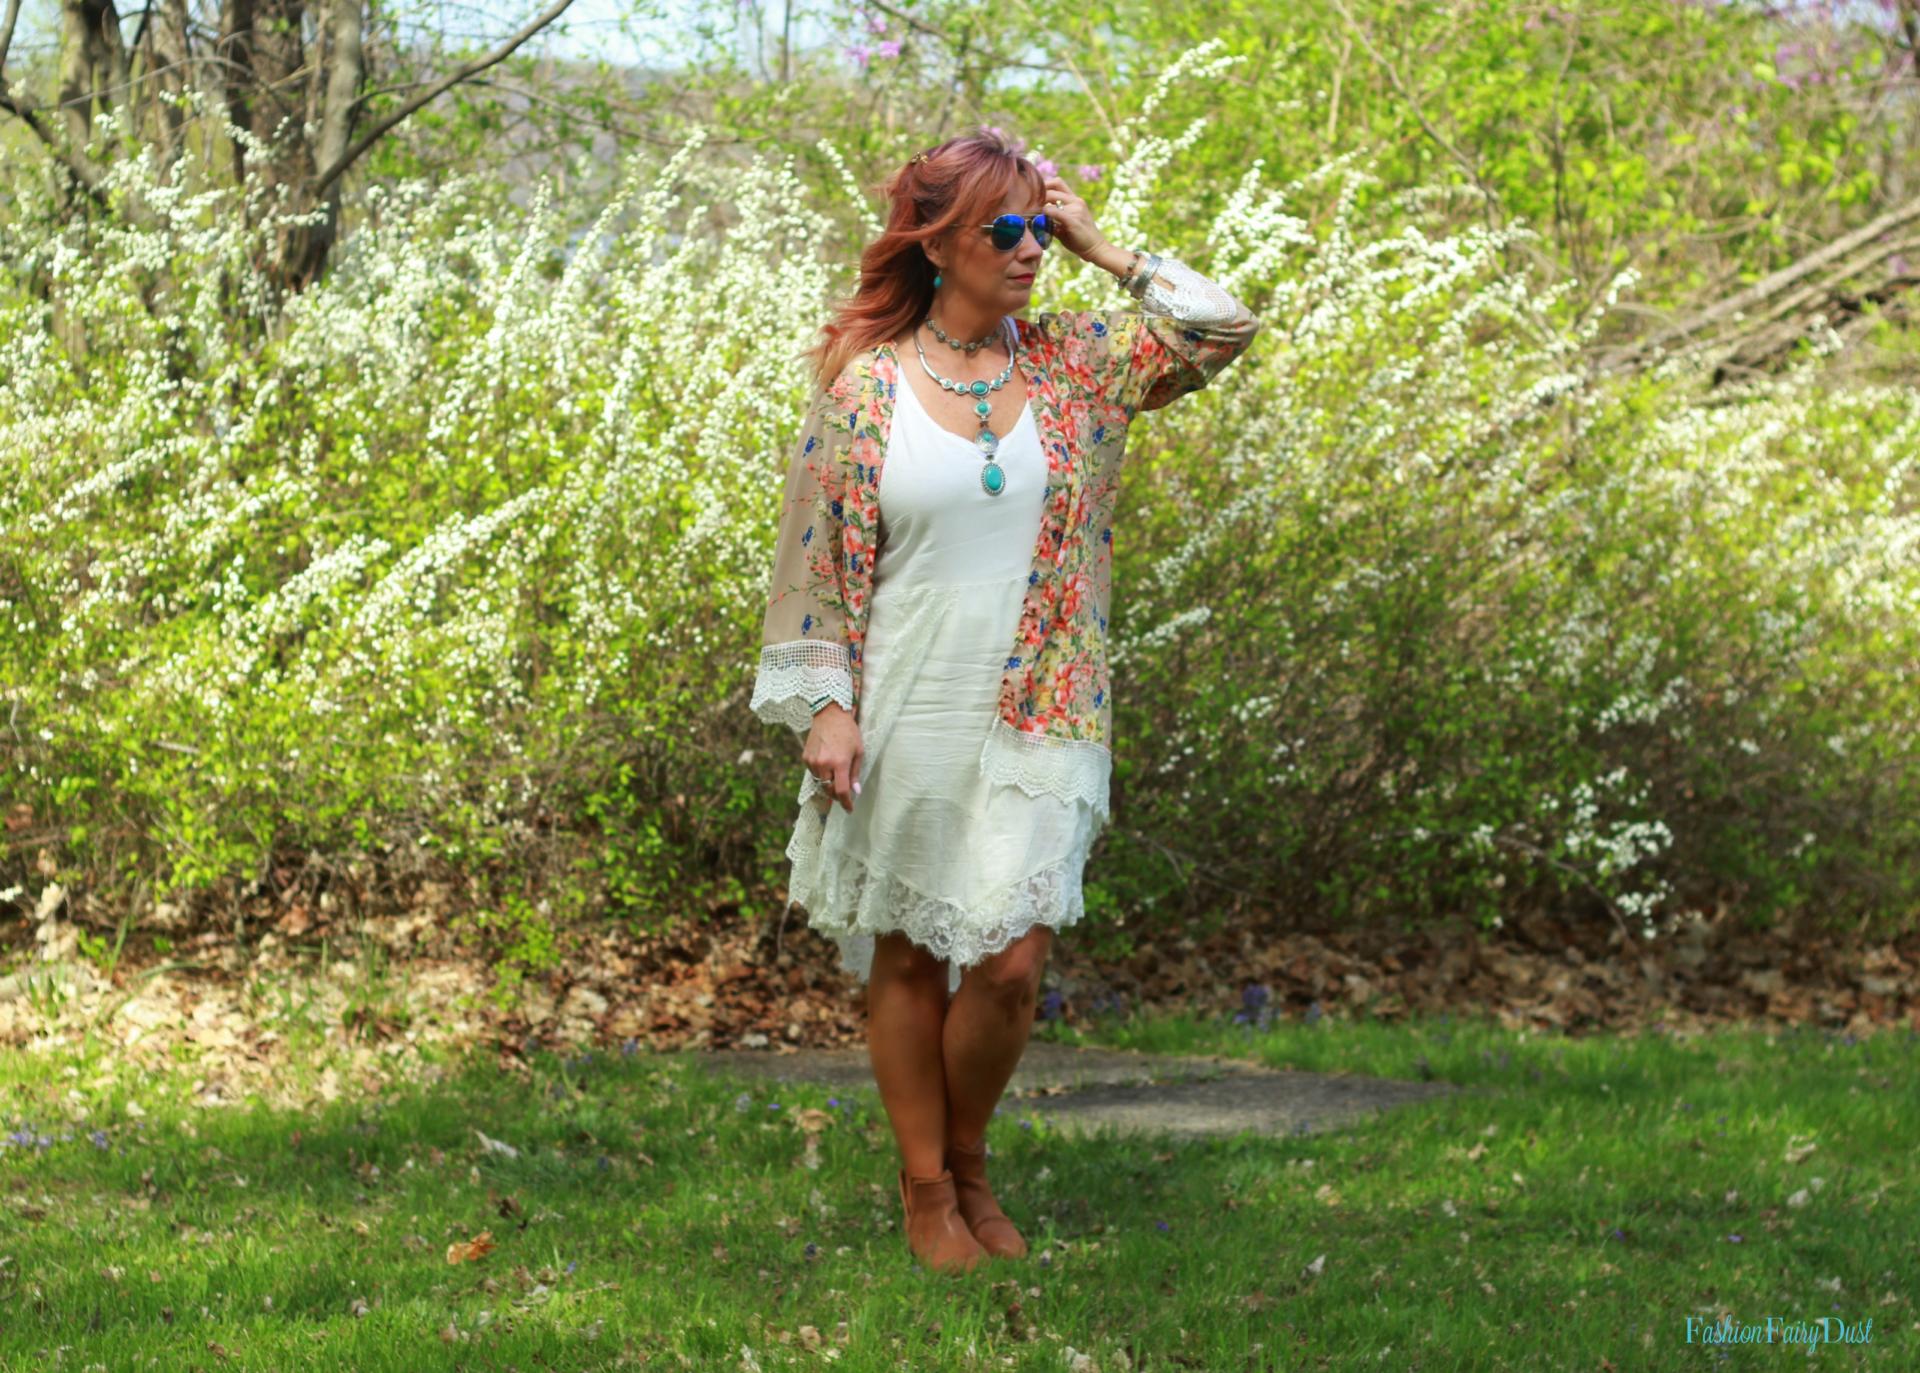 Floral print kimono, white sundress and ankle boots.